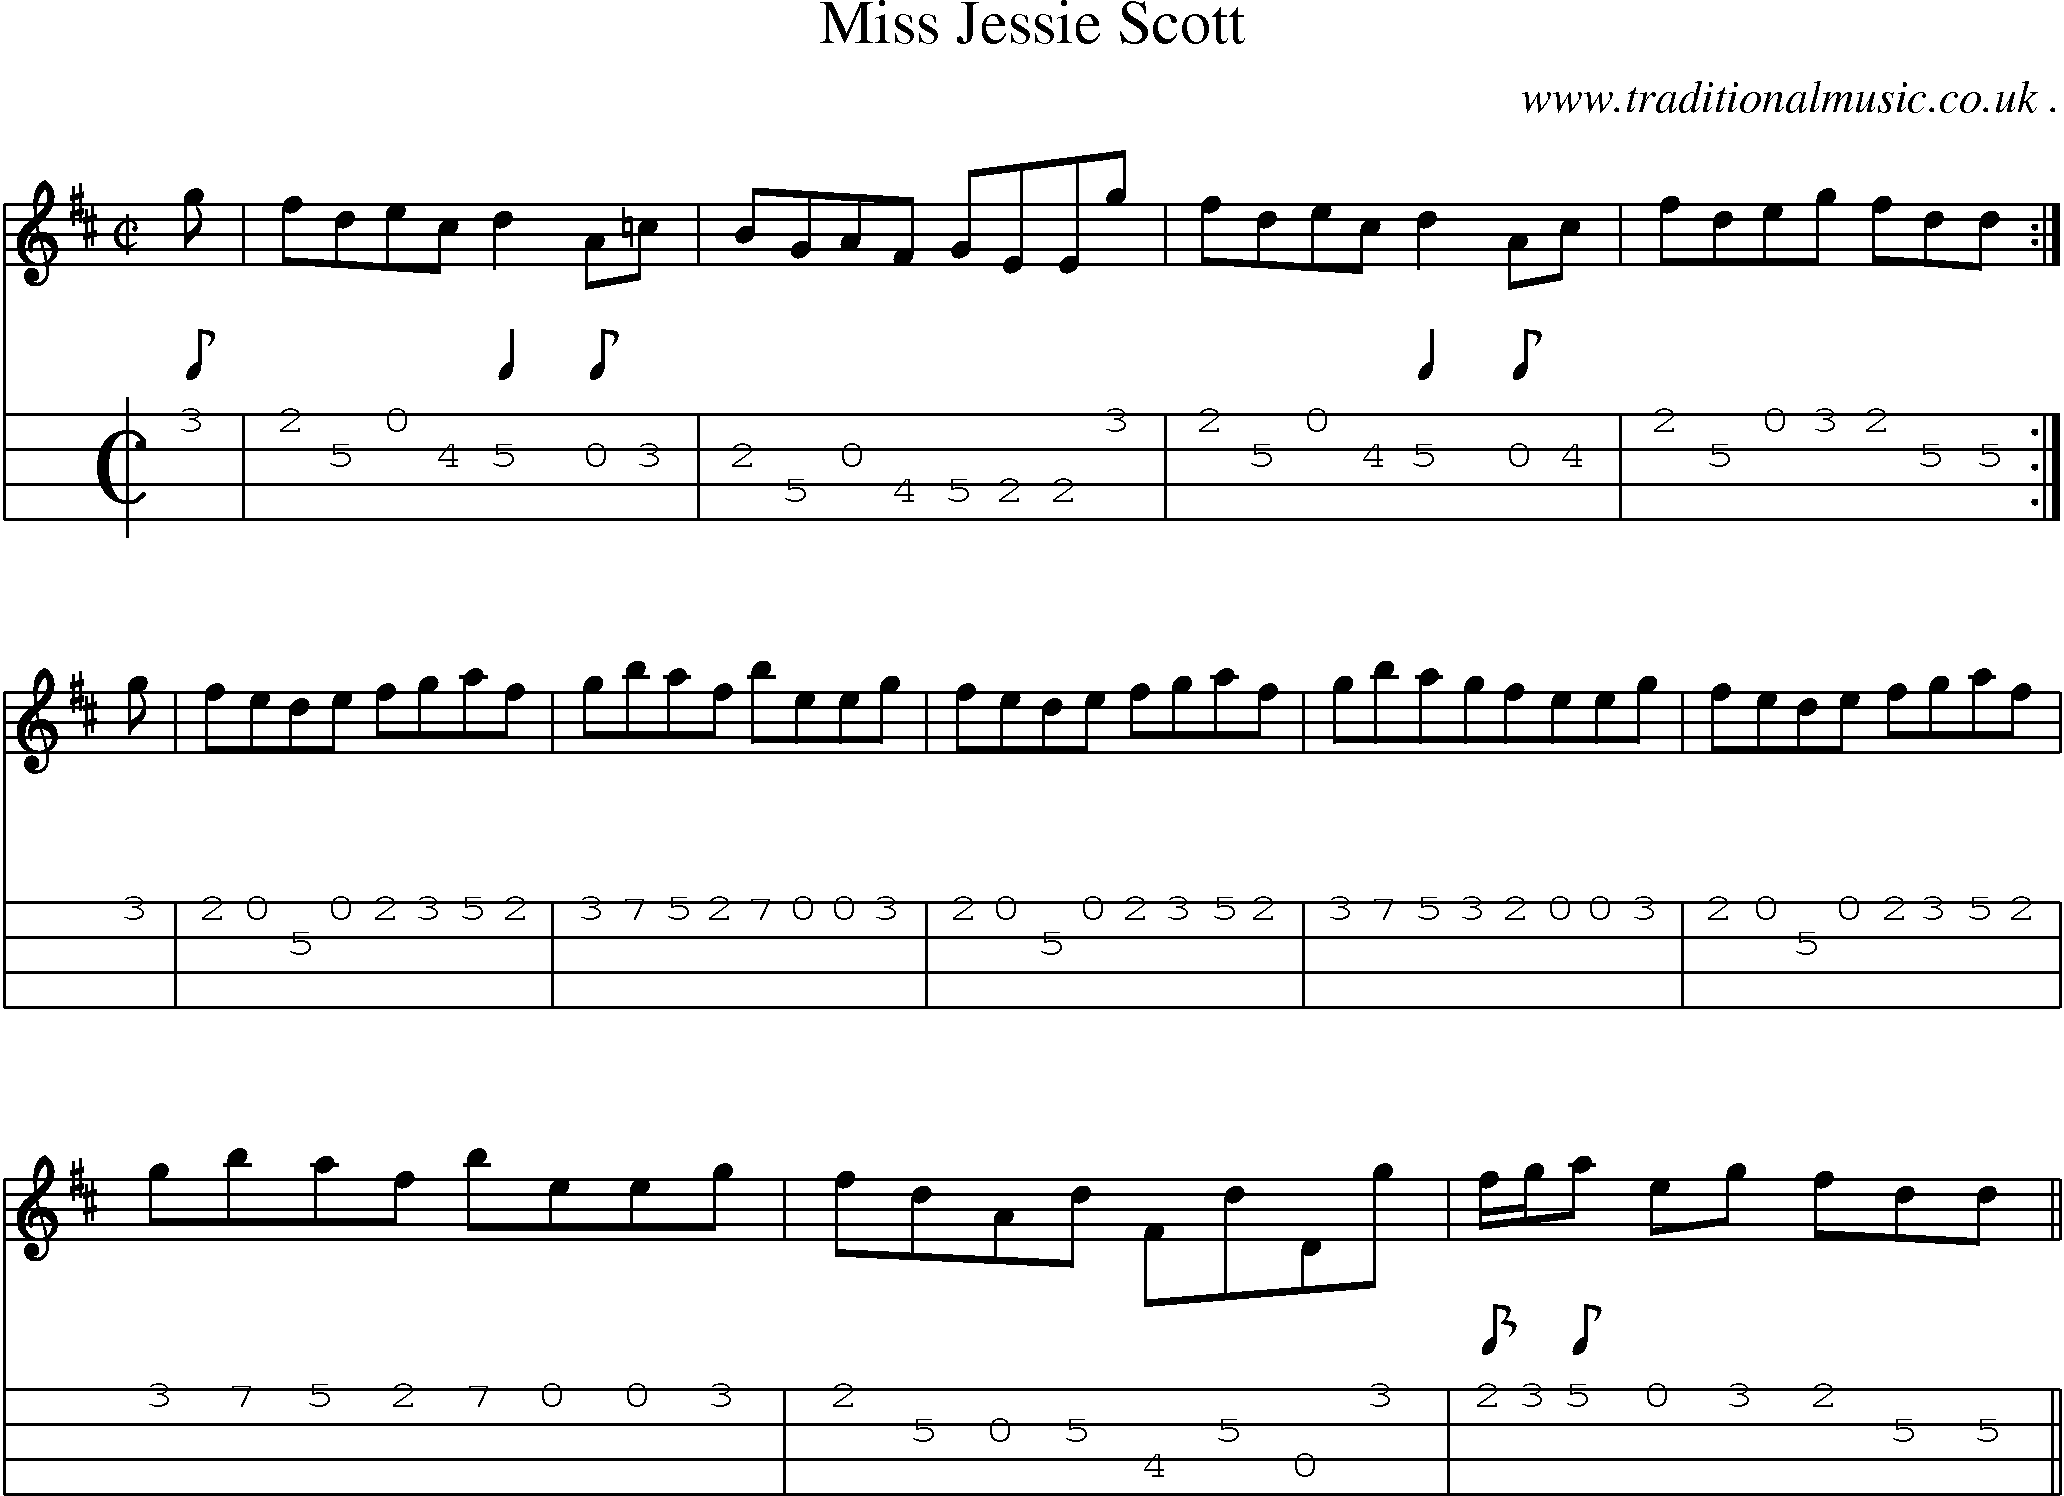 Sheet-music  score, Chords and Mandolin Tabs for Miss Jessie Scott